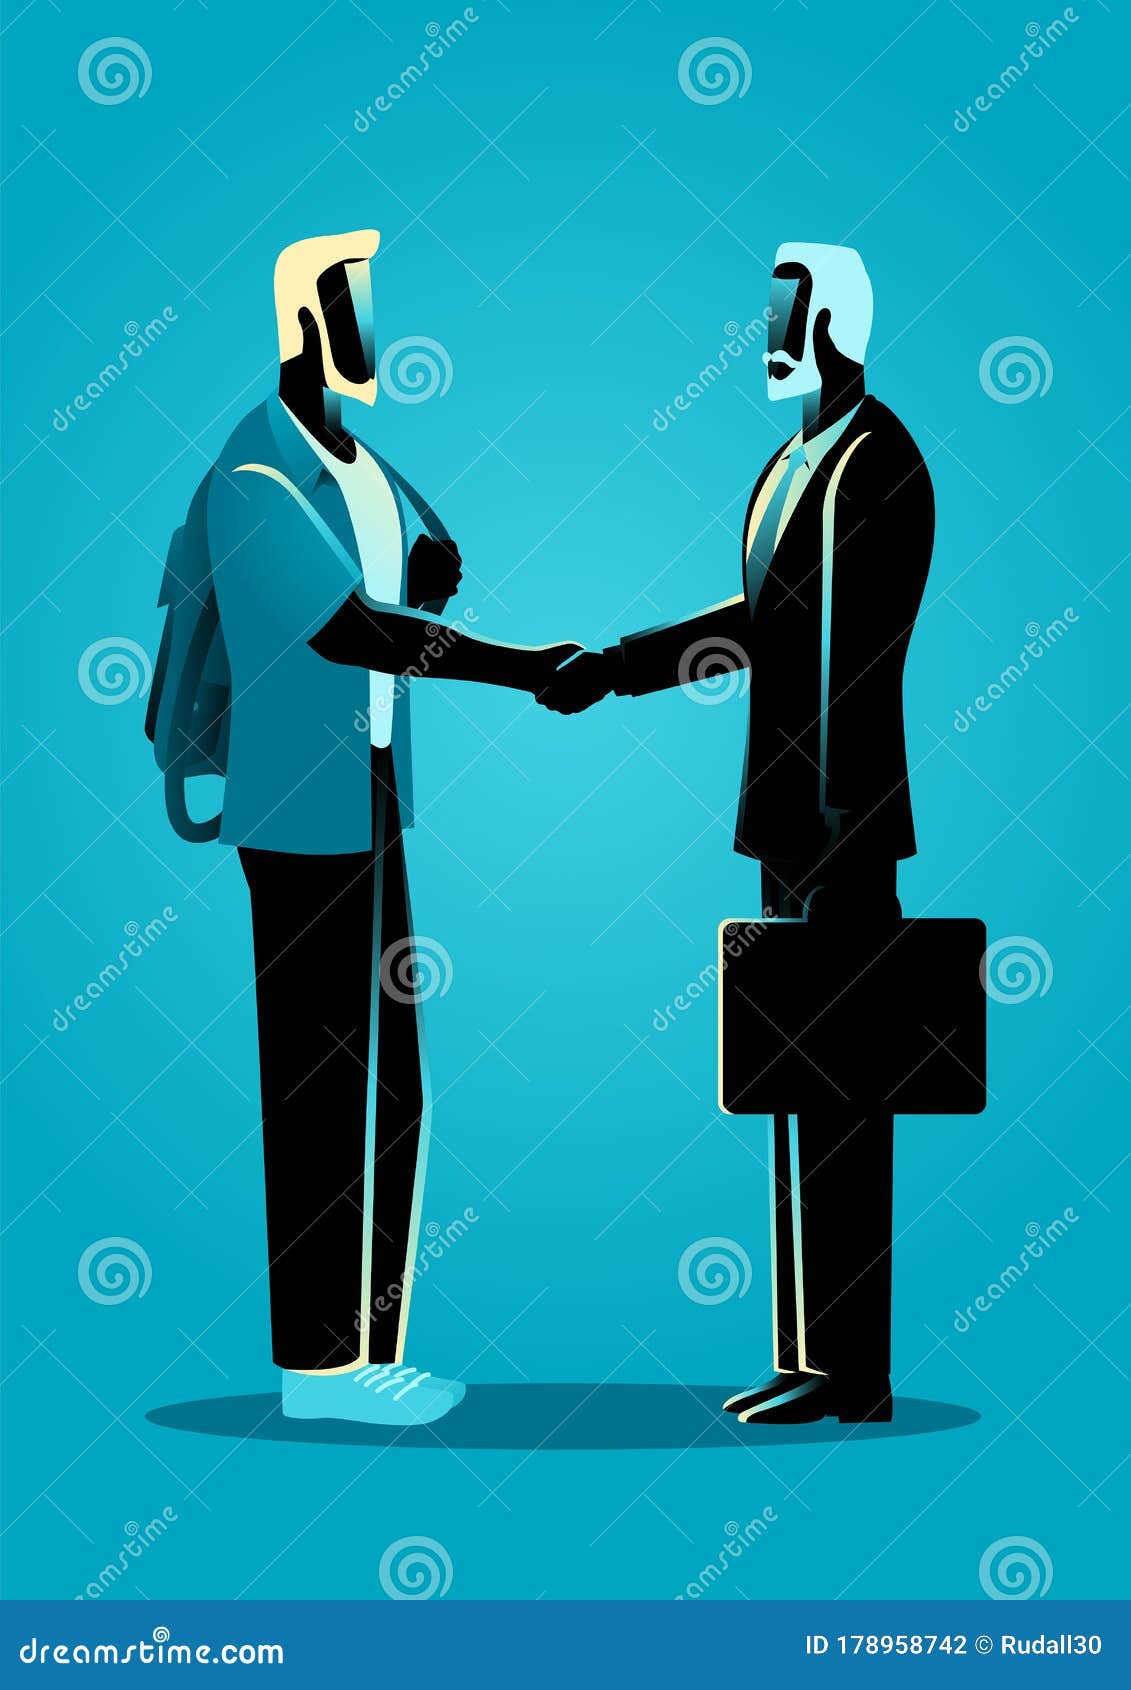 Shaking Hands Casual Stock Vector Illustration and Royalty Free Shaking  Hands Casual Clipart